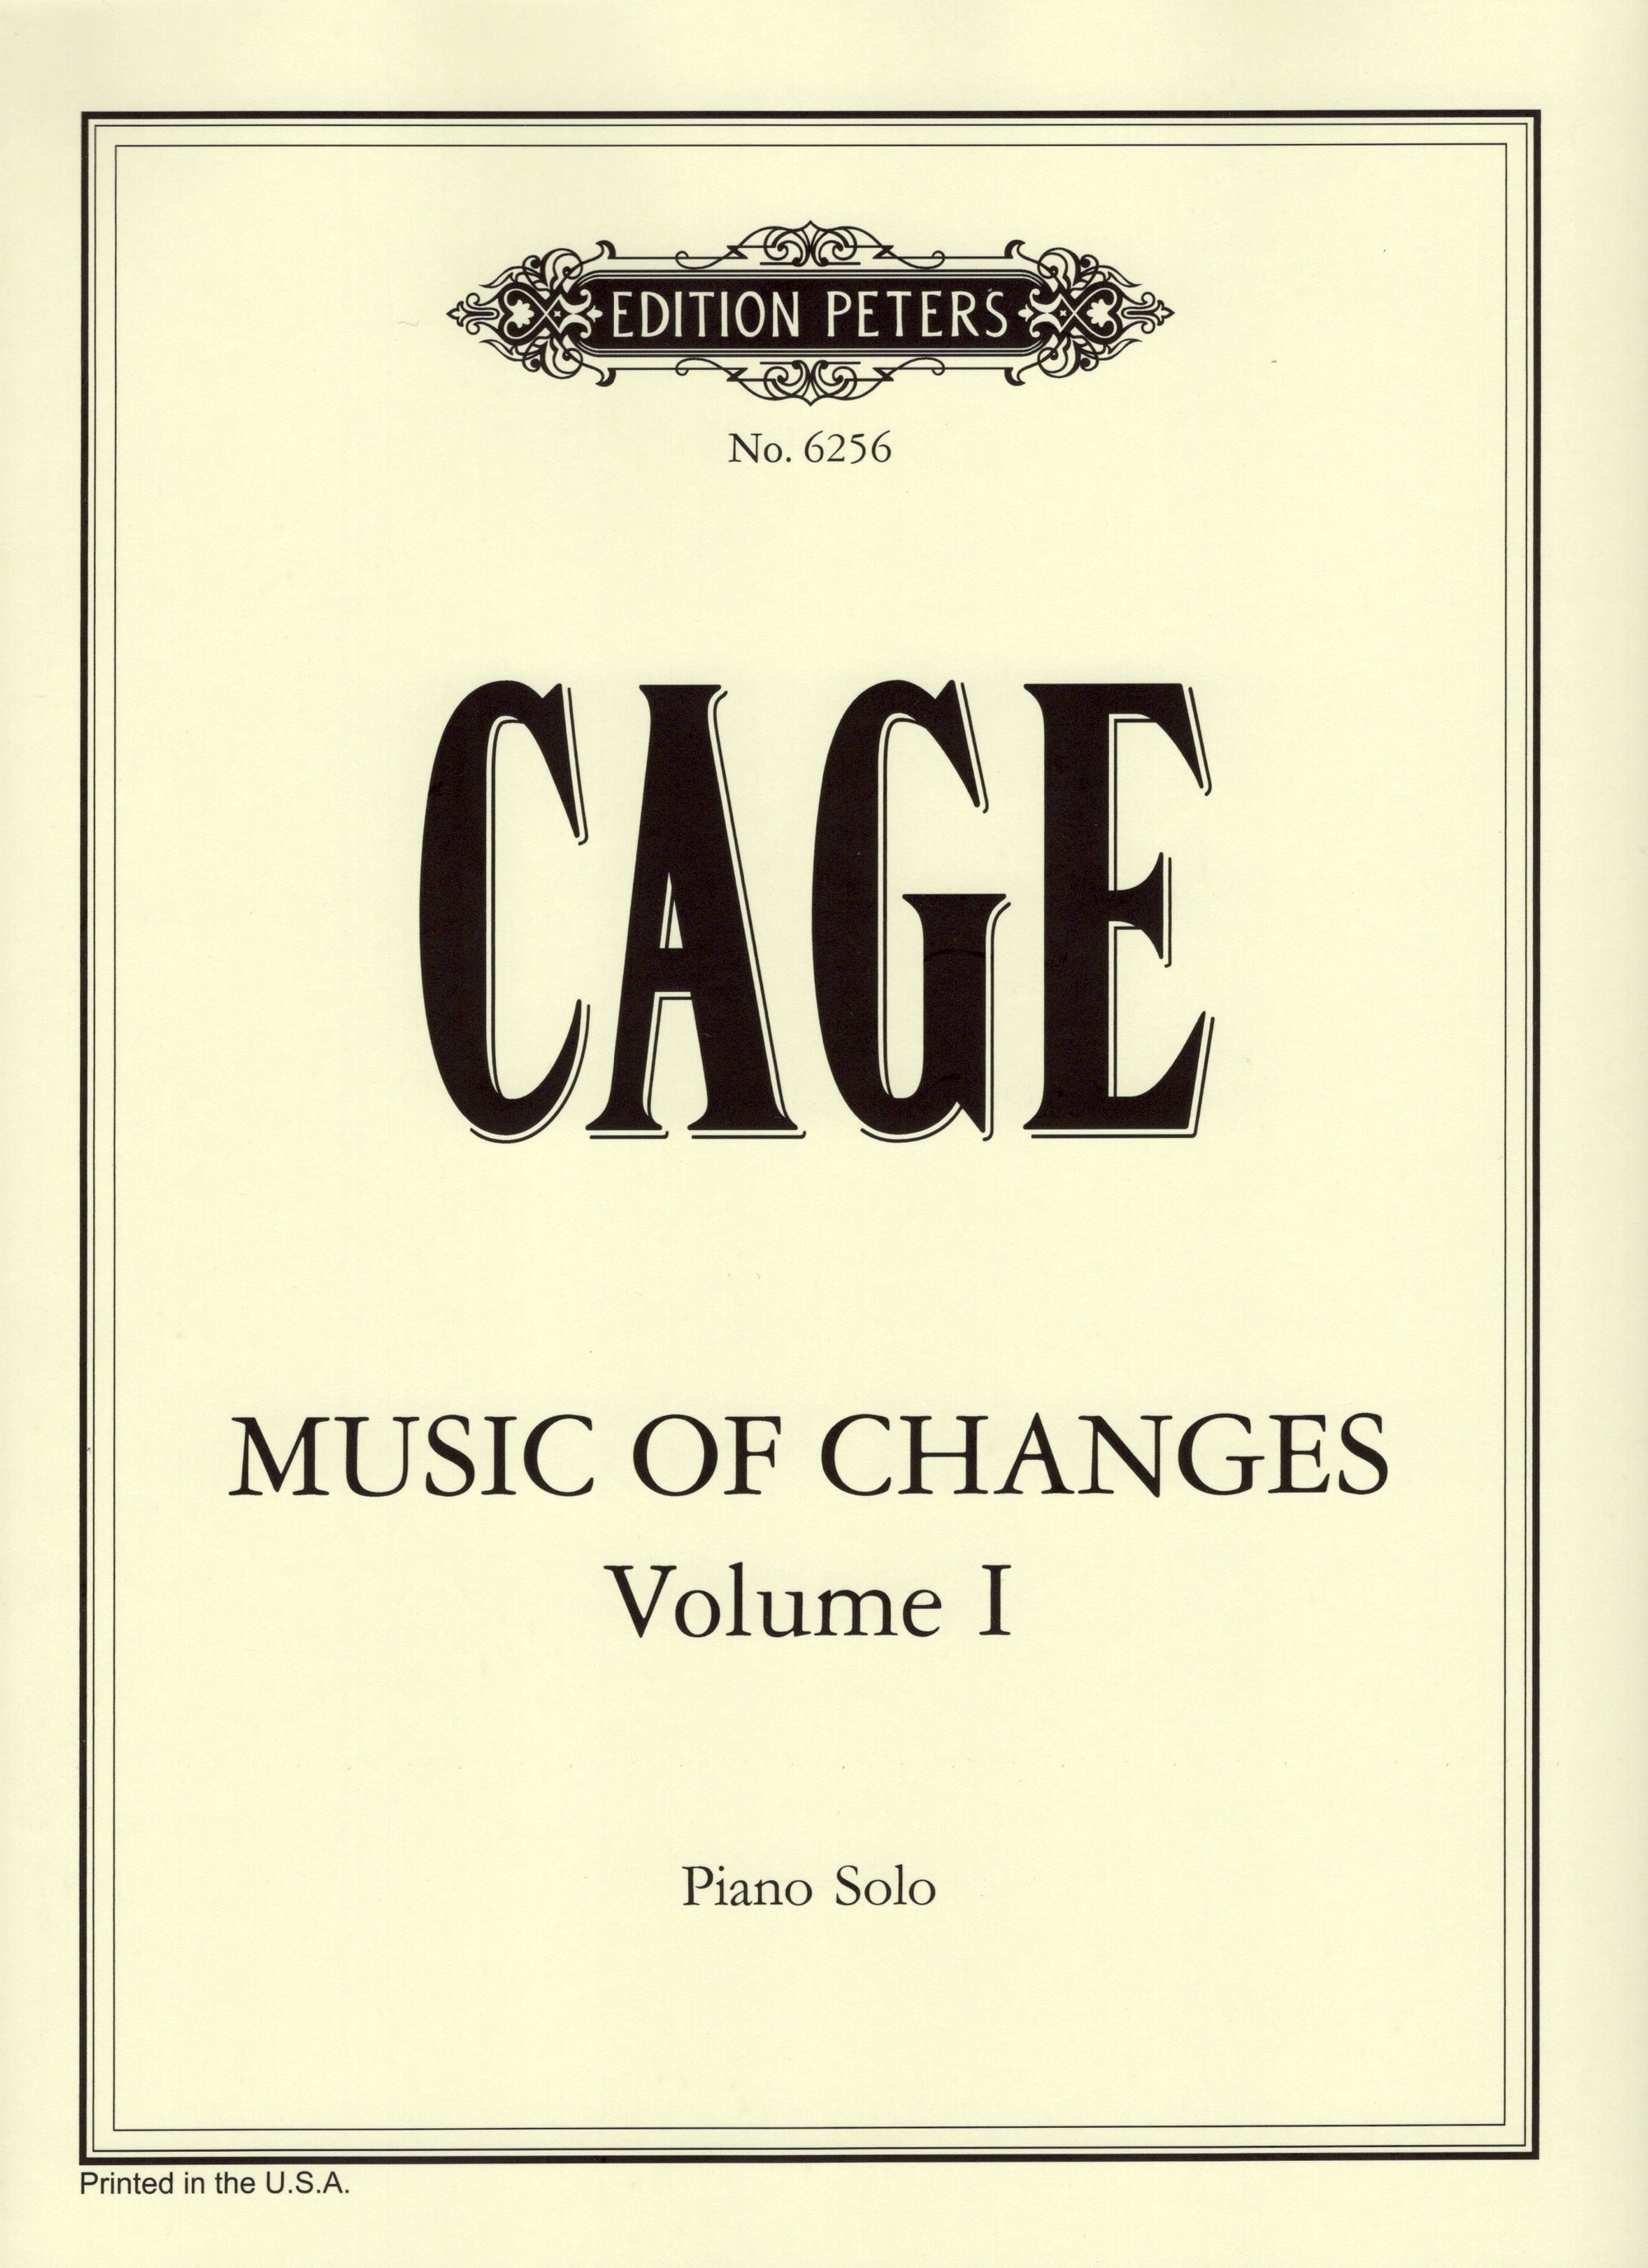 Cage: Music of Changes - Volume 1